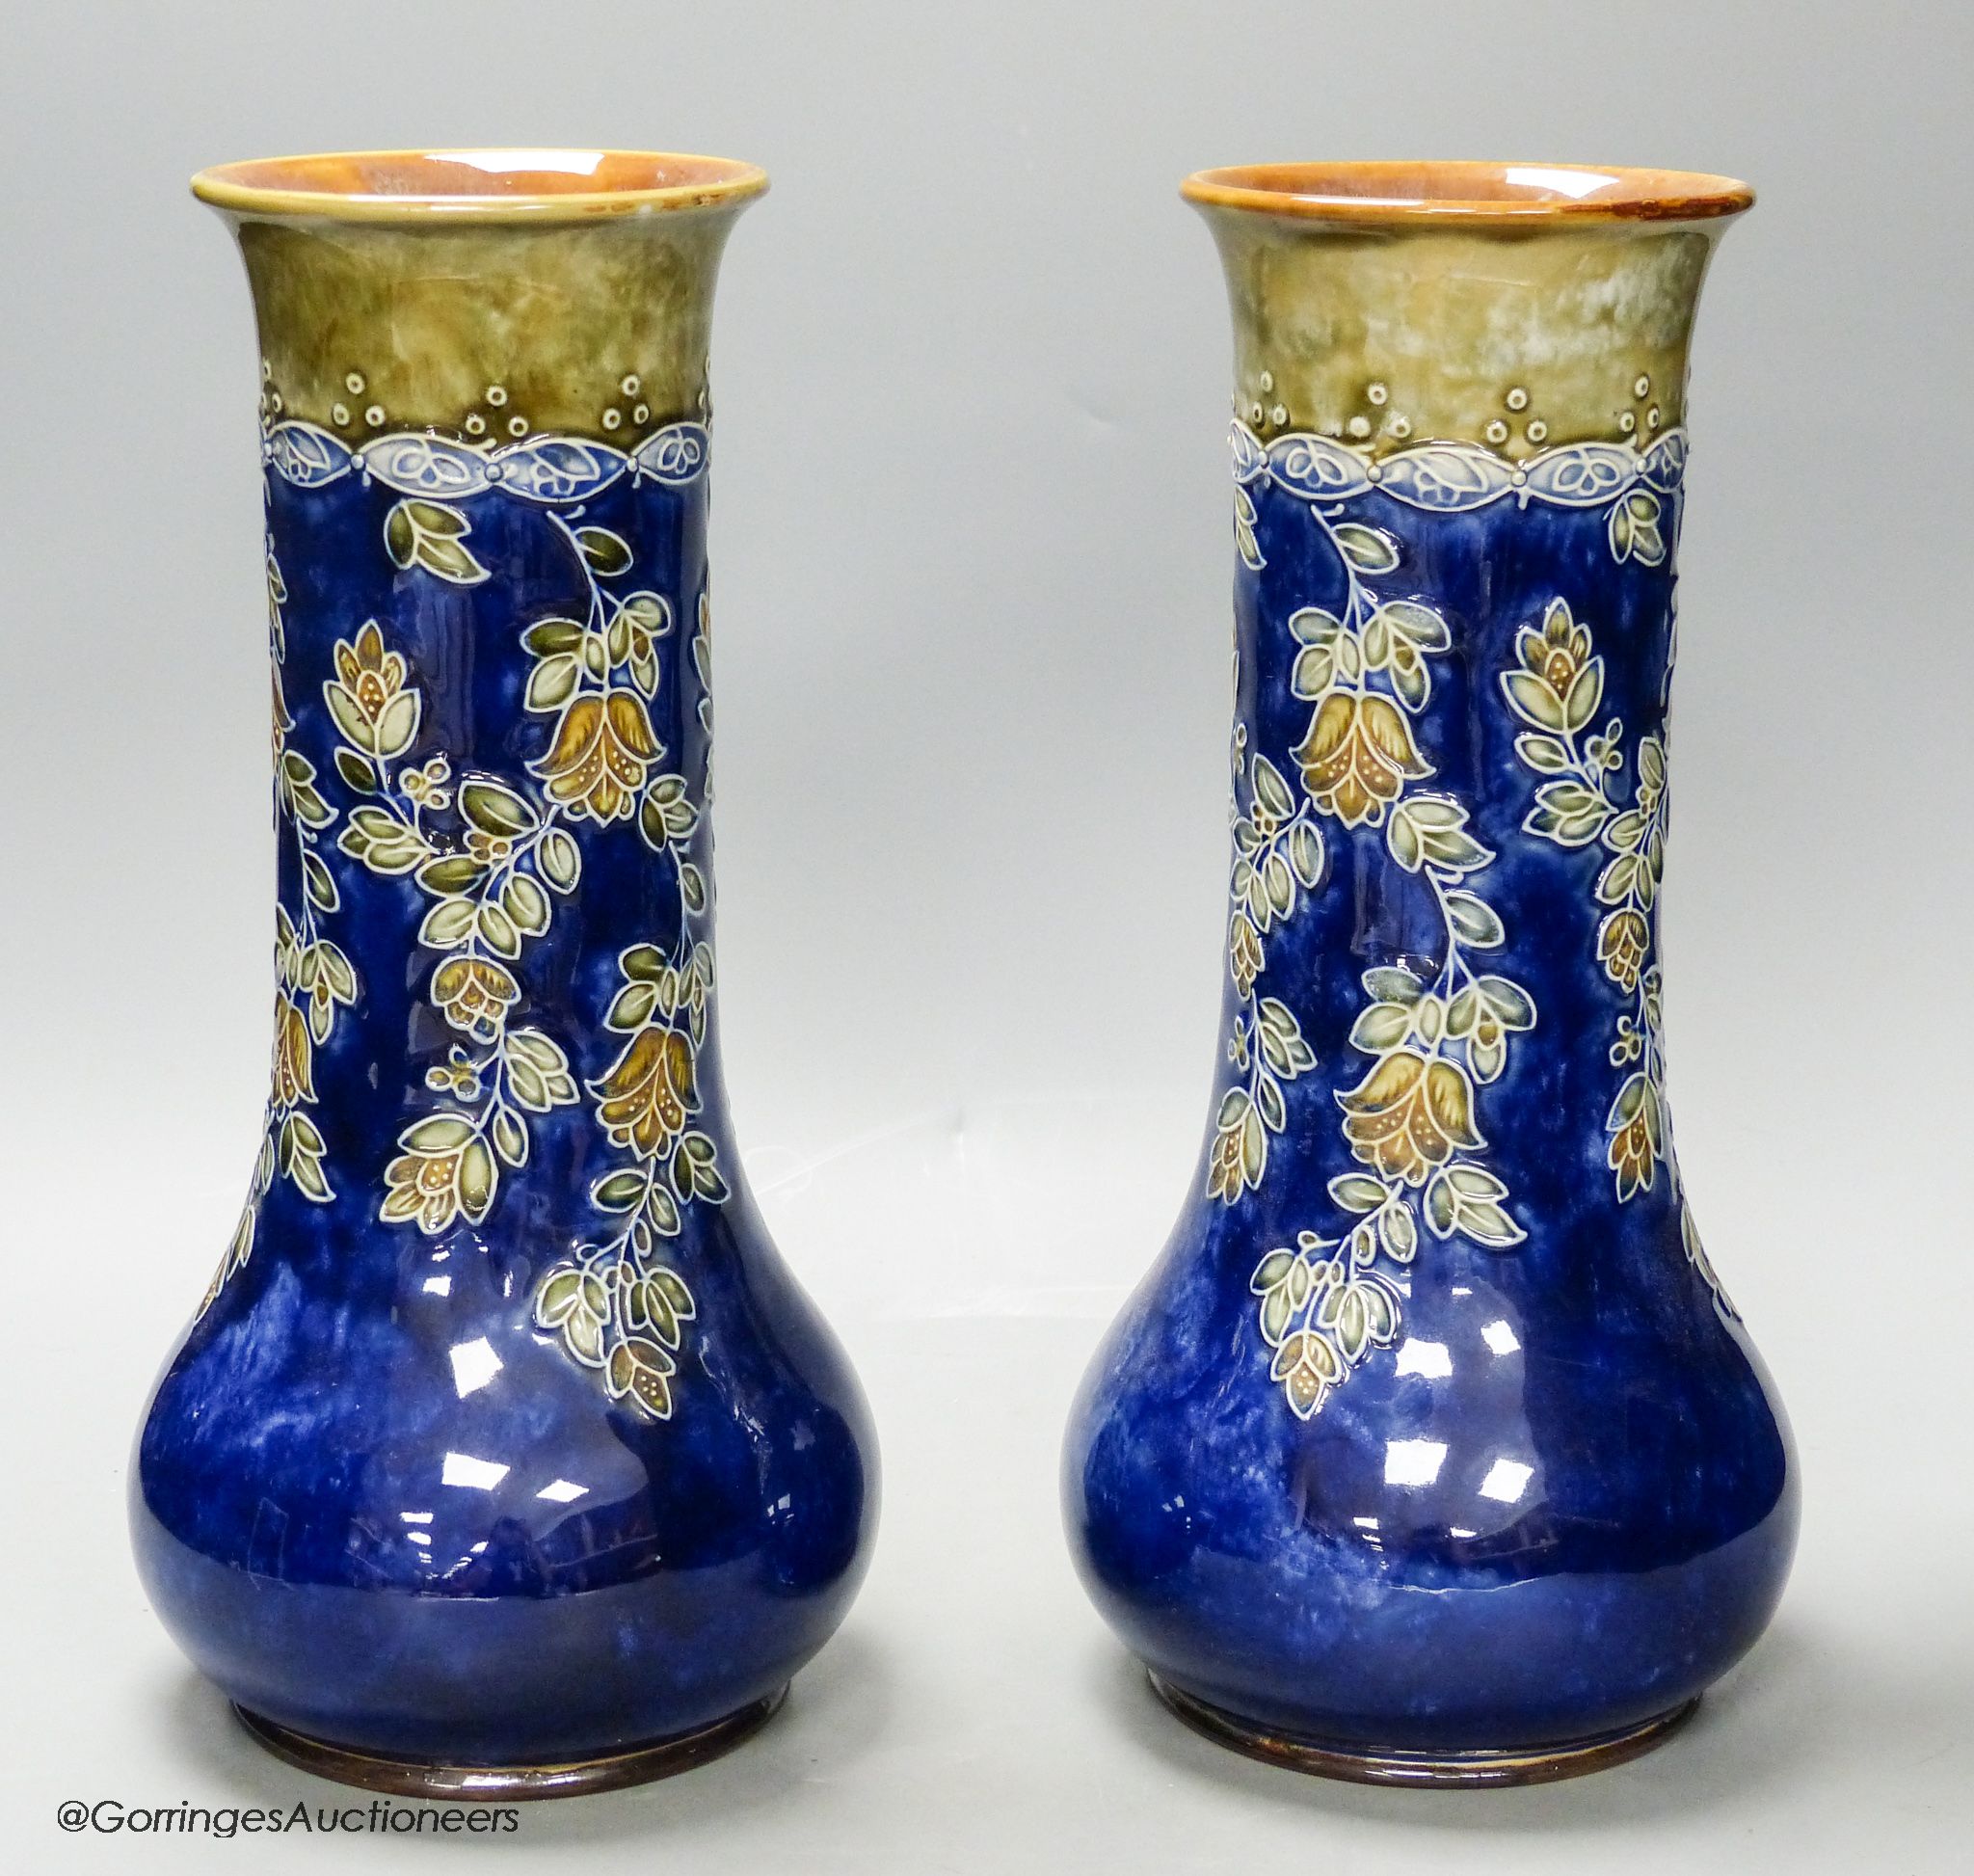 A large pair of Royal Doulton stoneware vases, height 33cm